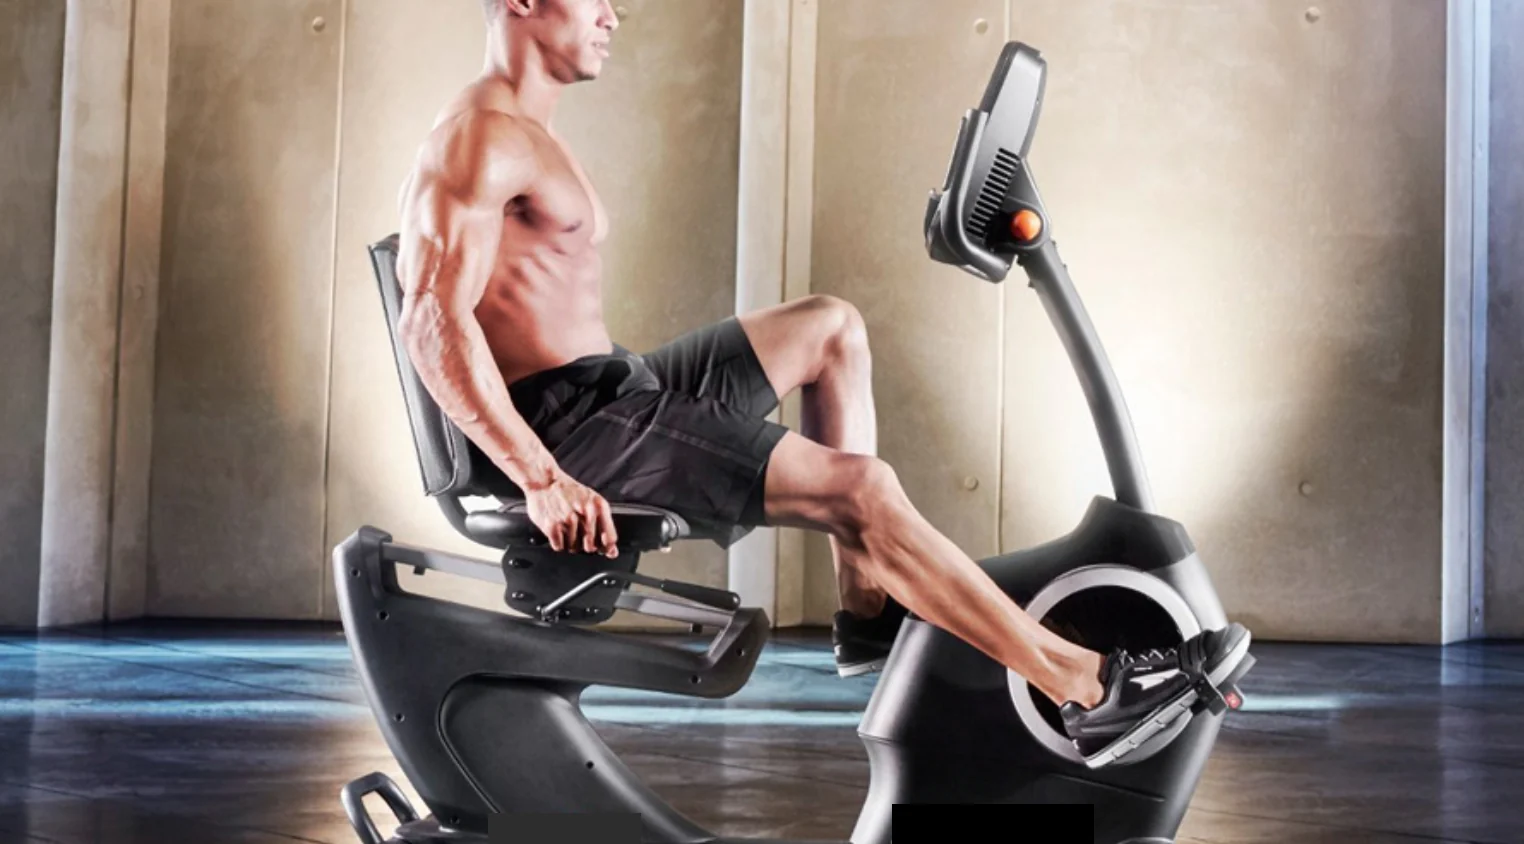 Are recumbent exercise bikes effective workout equipment?